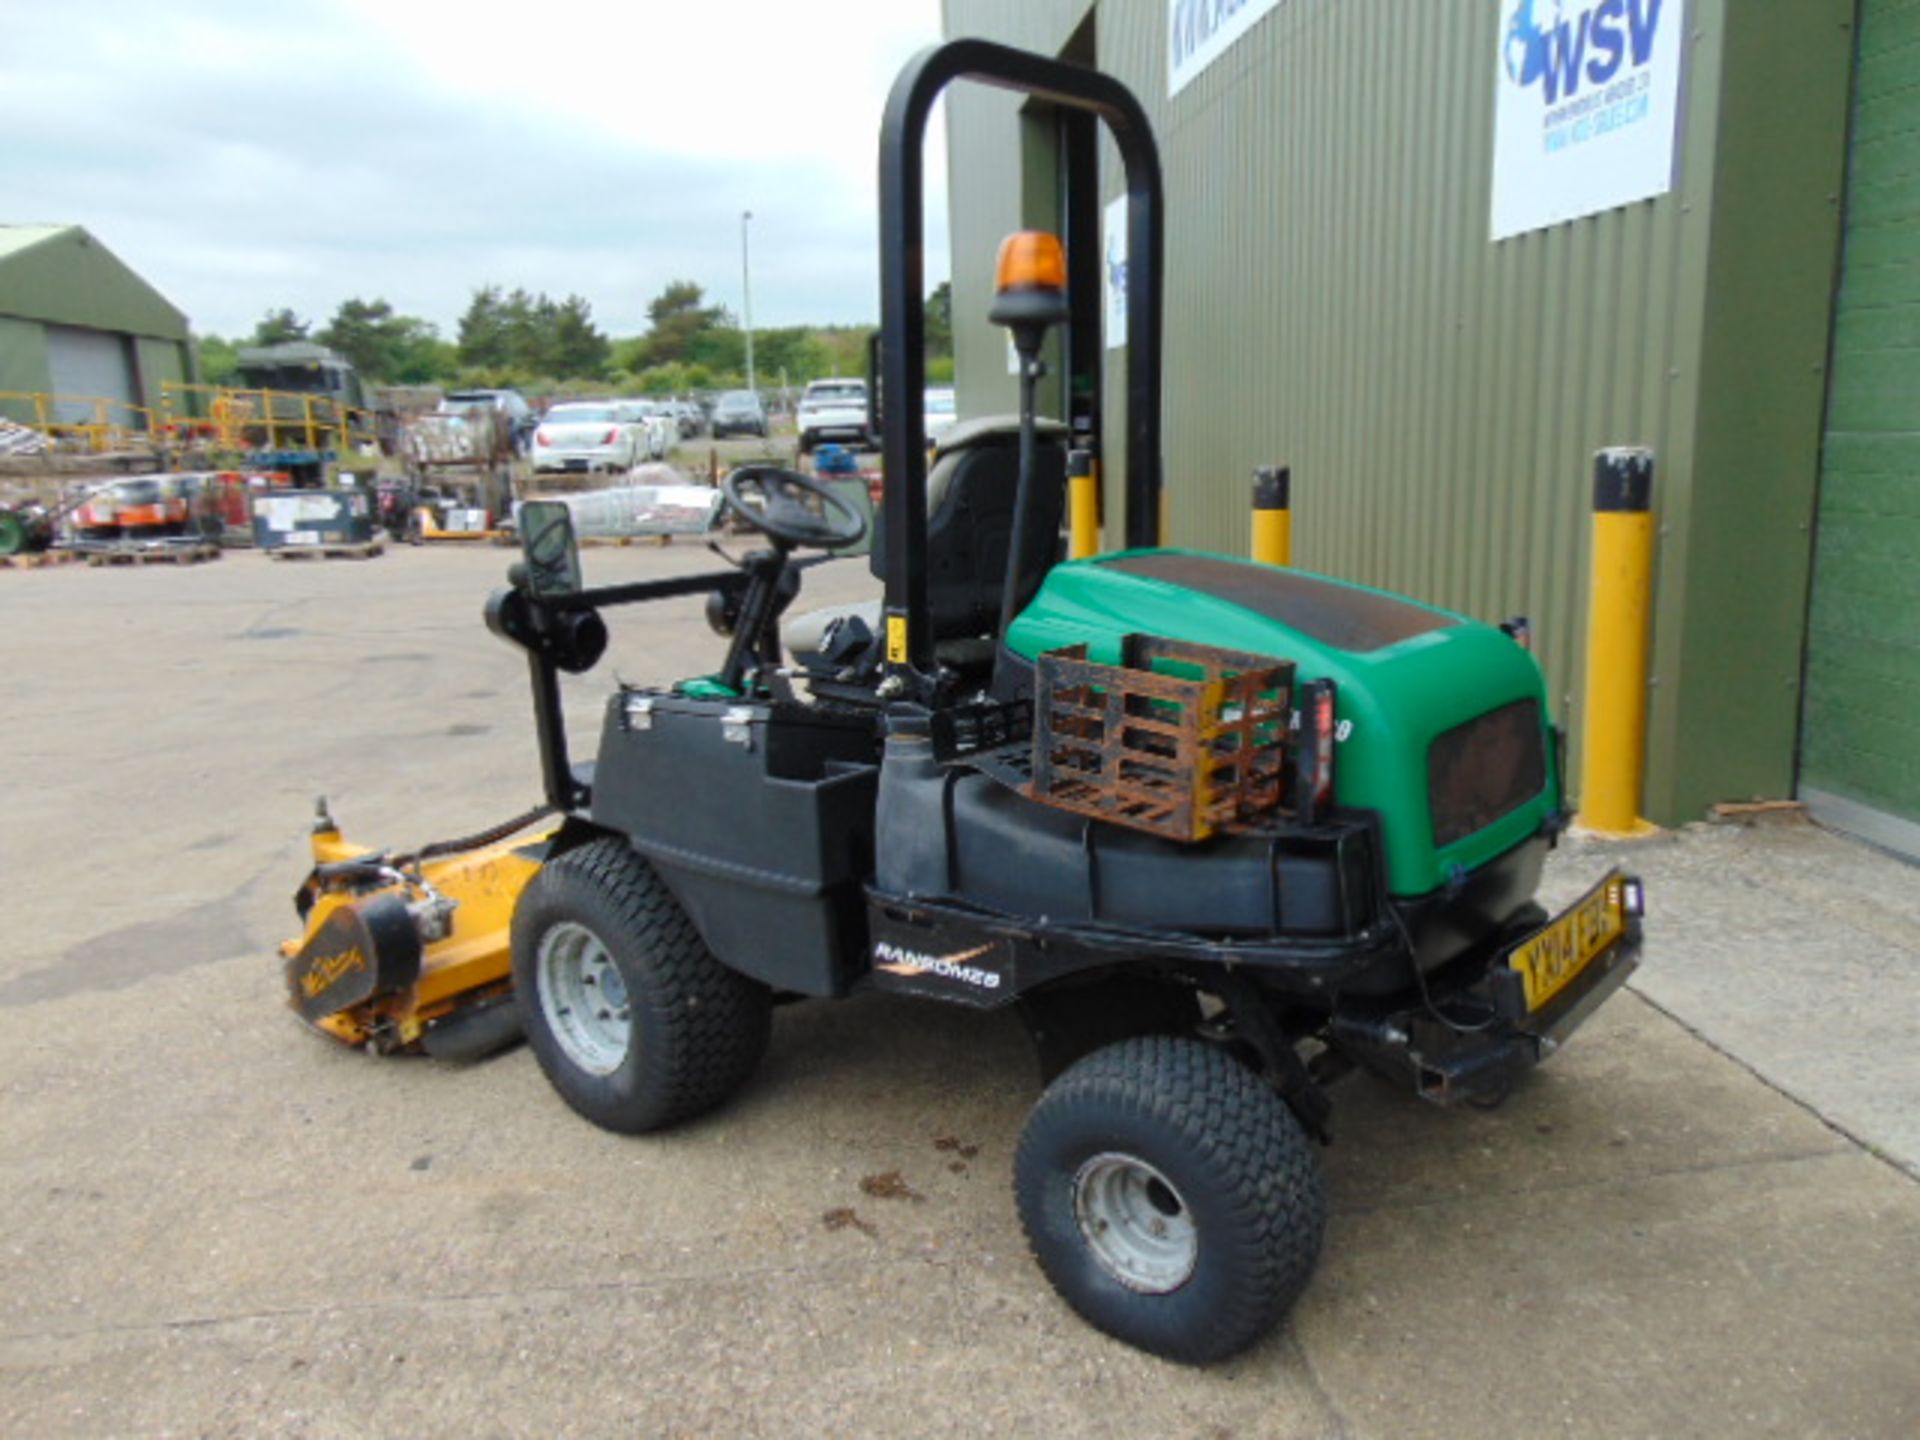 2014 Ransomes HR300 C/W Muthing Outfront Flail Mower ONLY 2,395 HOURS - Image 6 of 24